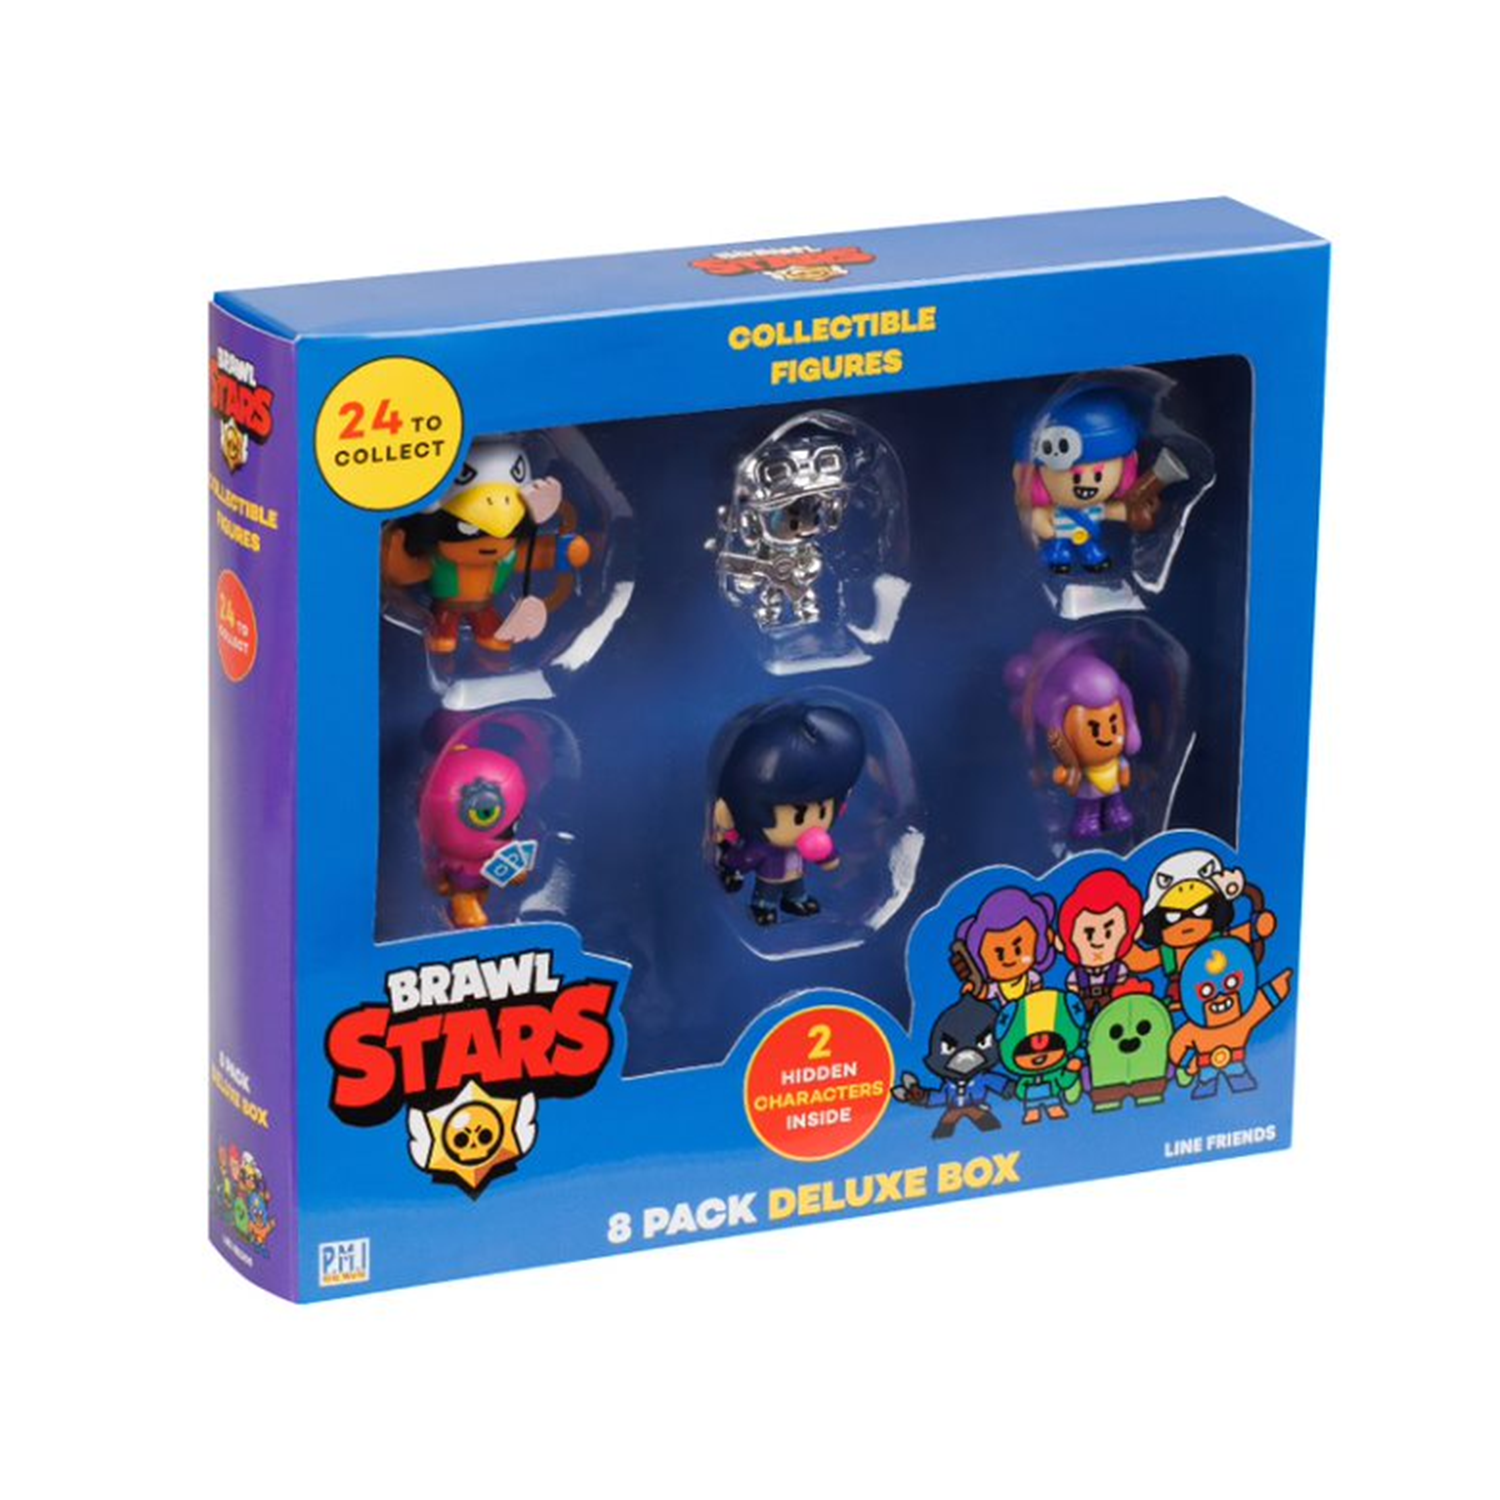 BRAWL STARS - figures 8 pack Deluxe box (S1) - including 2 r